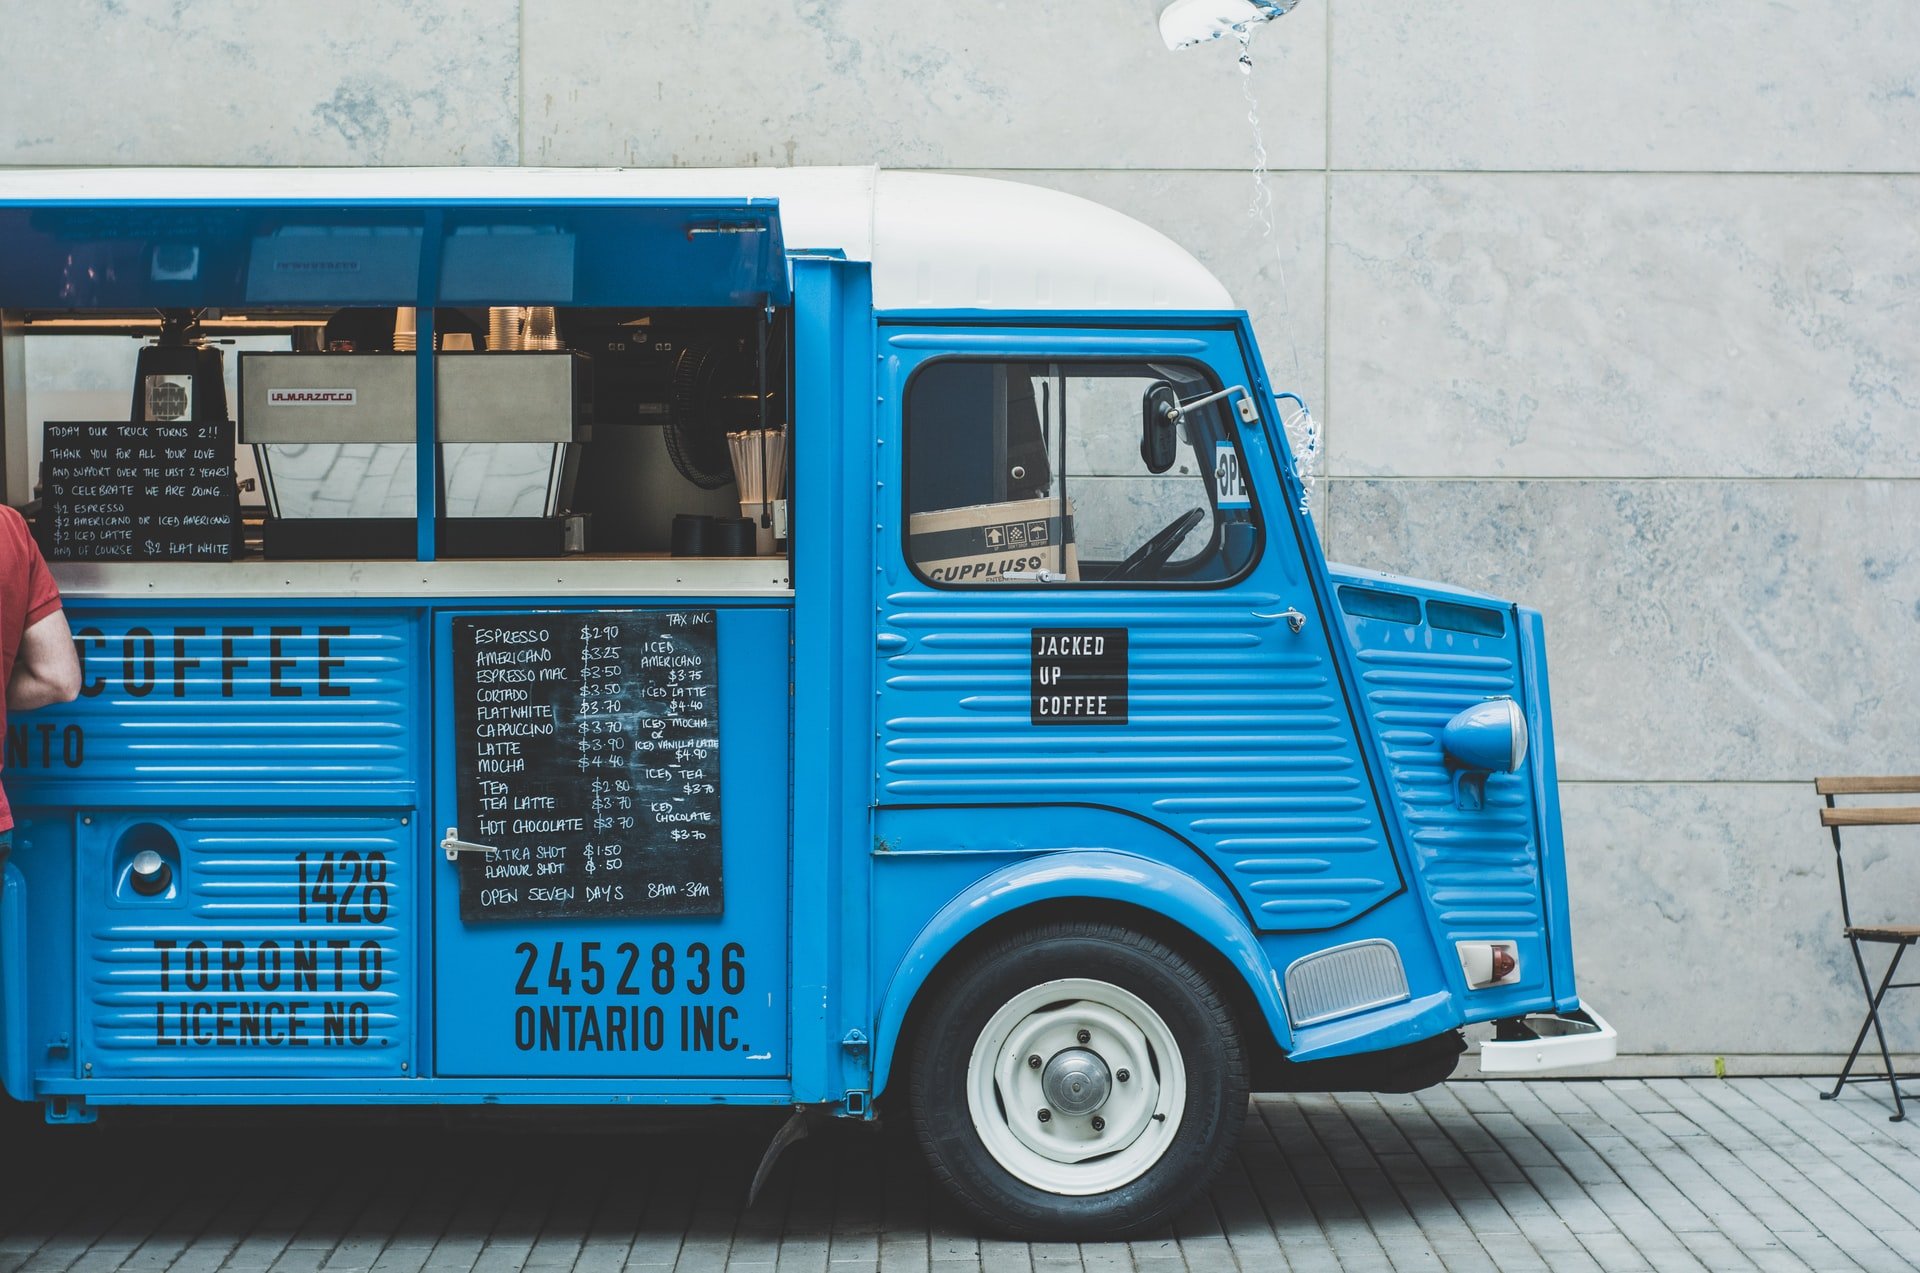 Pop-Up Restaurants: Start Small, and Build Your Business